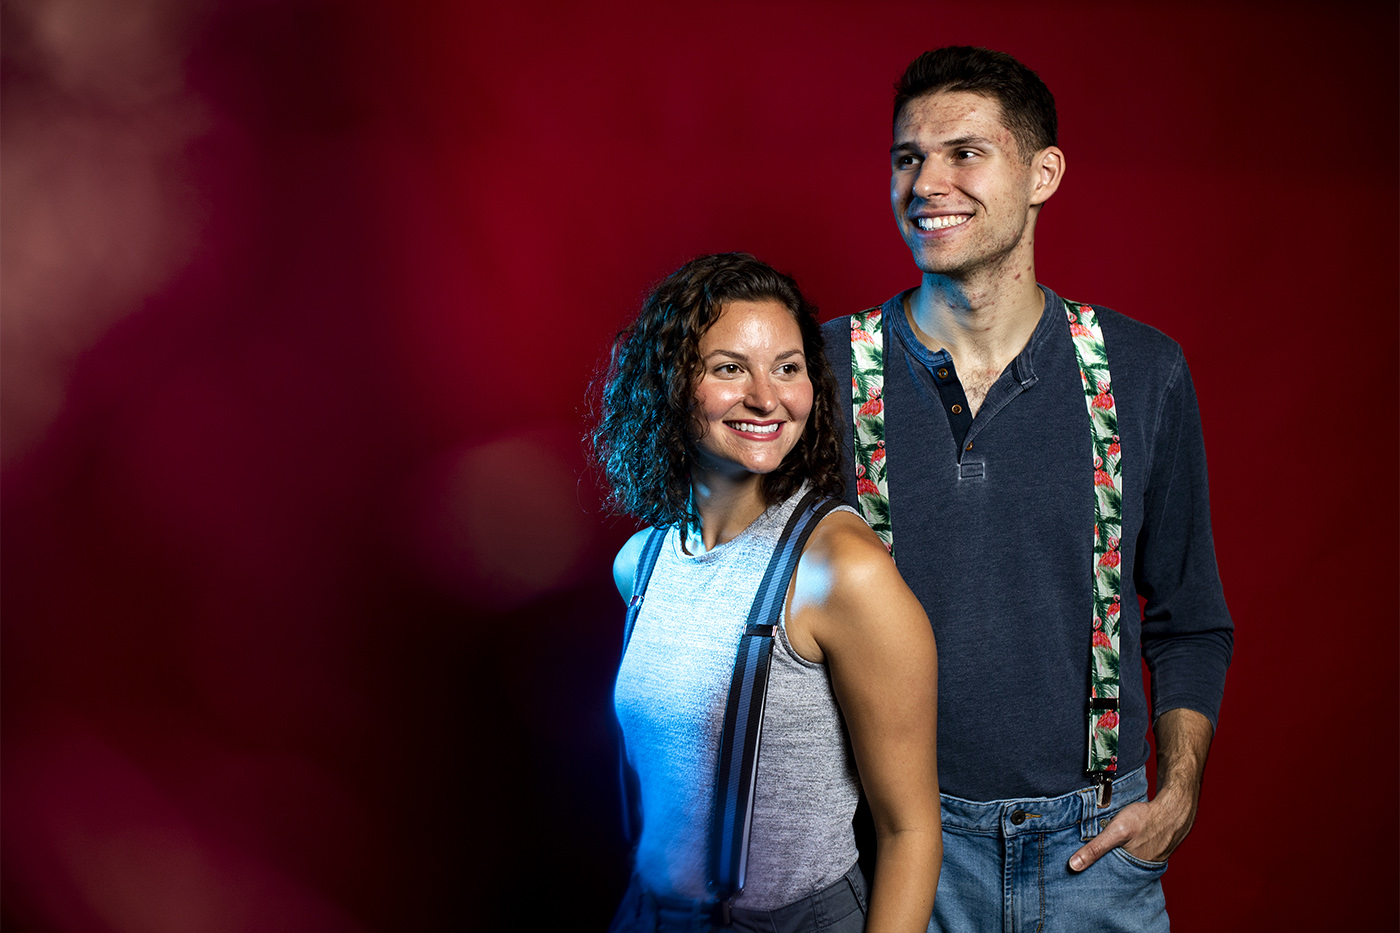 Northeastern graduates Tyler and Tori Farley have created a line of suspenders that, they say, are playful enough to wear with T-shirts and tasteful enough to wear with tuxedos. Photo by Ruby Wallau/Northeastern University